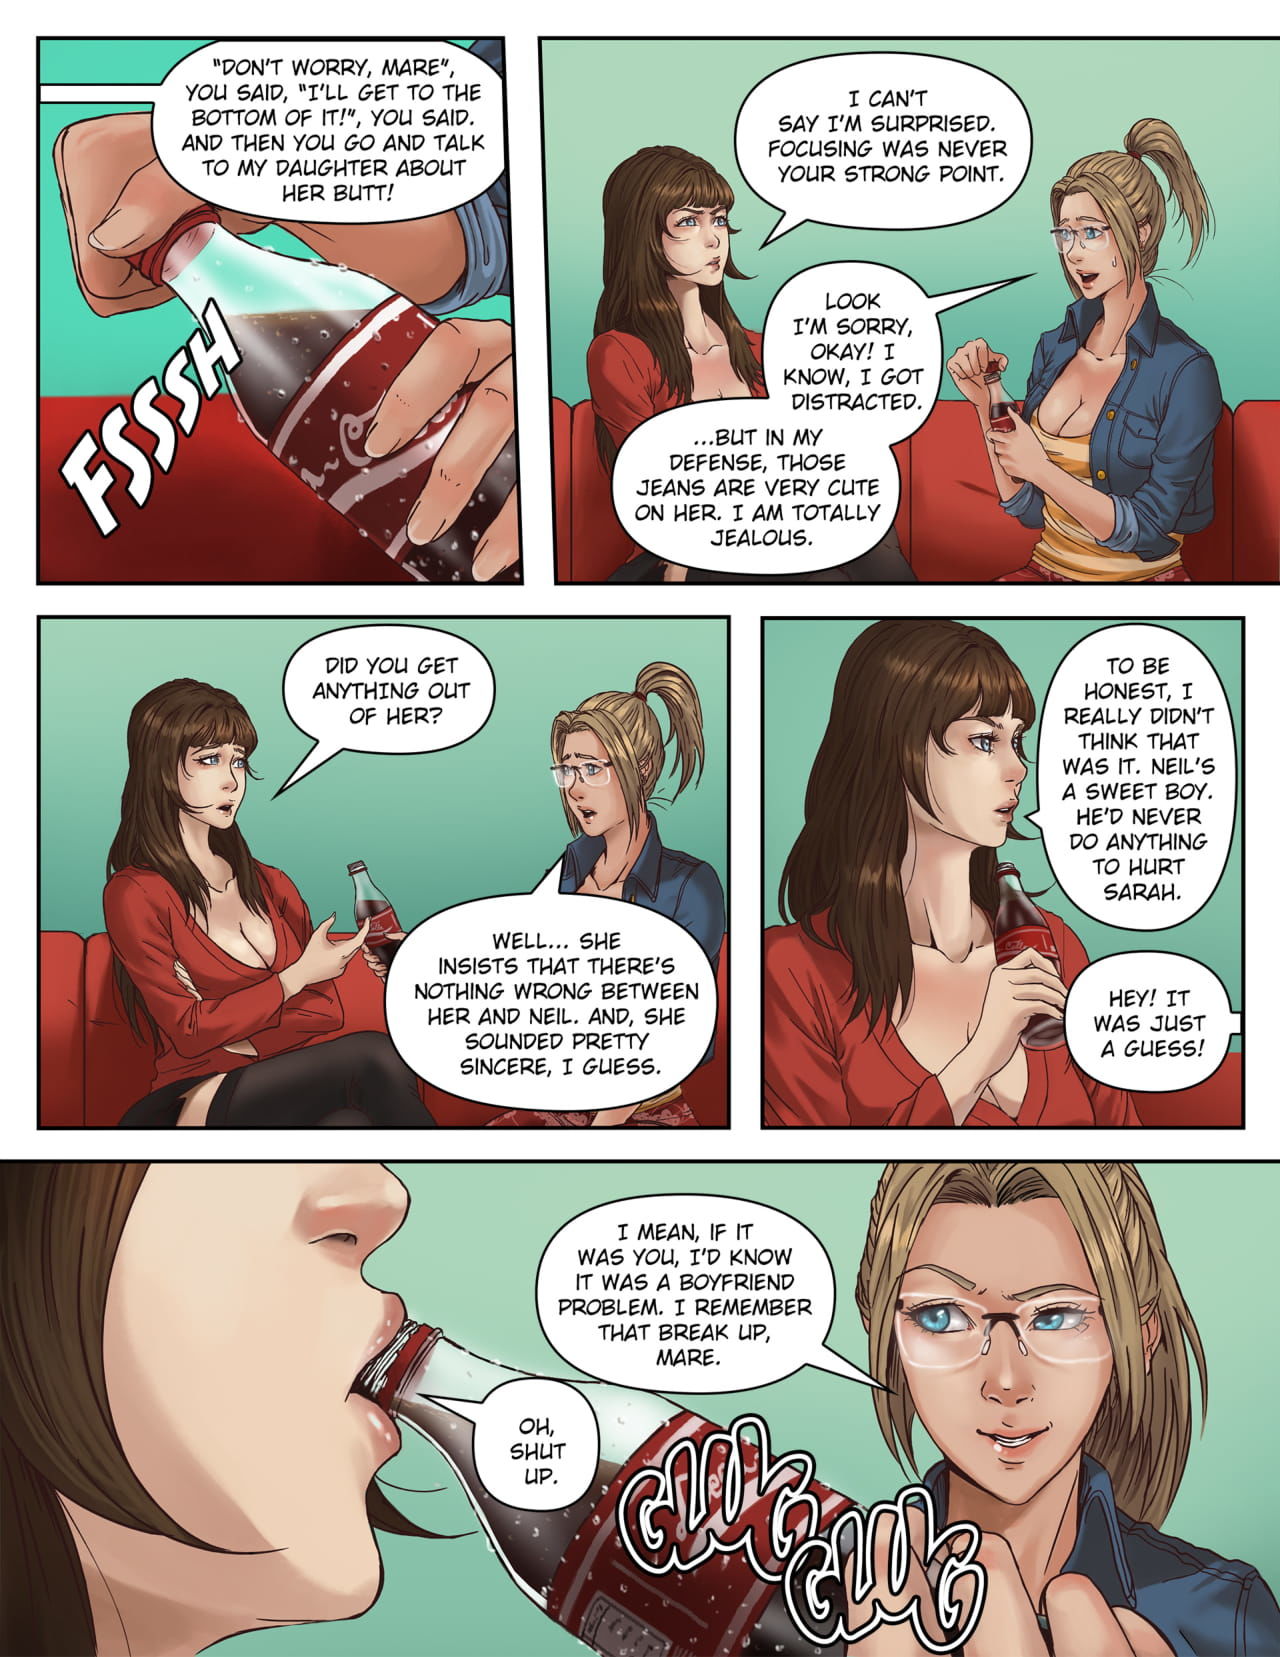 A Weekend Alone Issue 10 Giantess Fan page 21